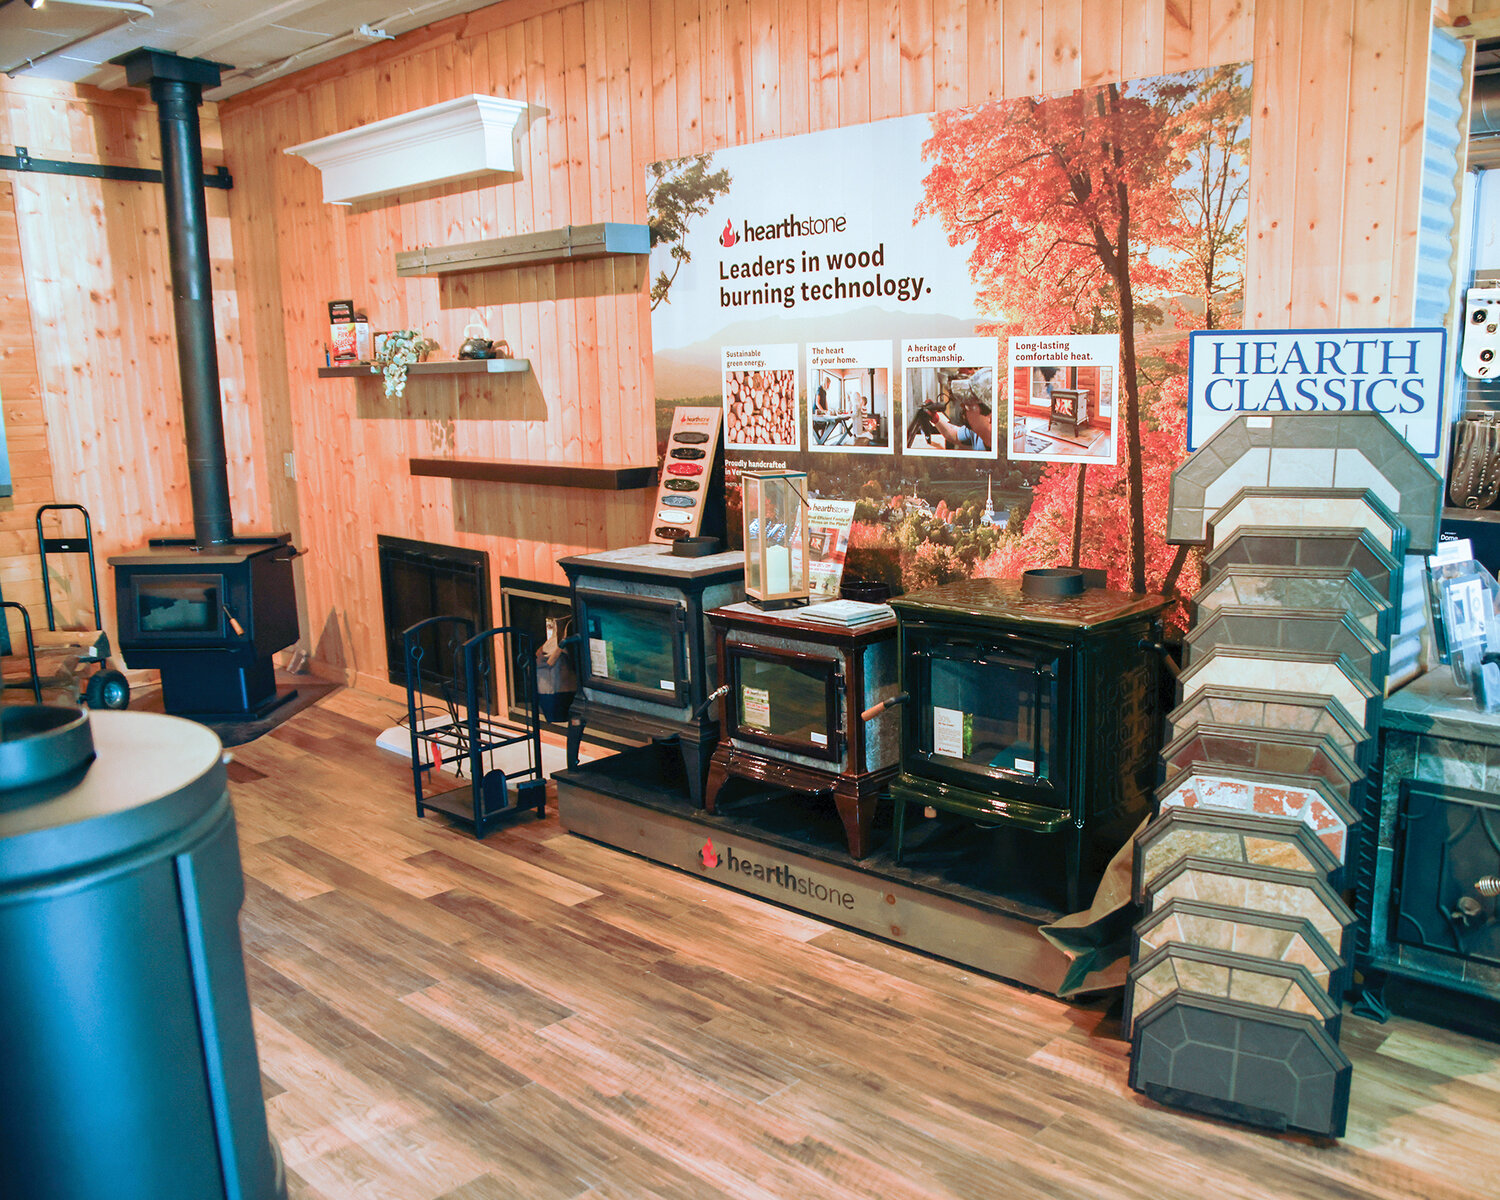 Wood and pellet stoves dominate the North Clark County market, Hugh Morris, co-owner of LUMOS Hearth and Home in Battle Ground, said. With state and federal regulations, wood and pellet stoves have become more efficient and better for the environment.